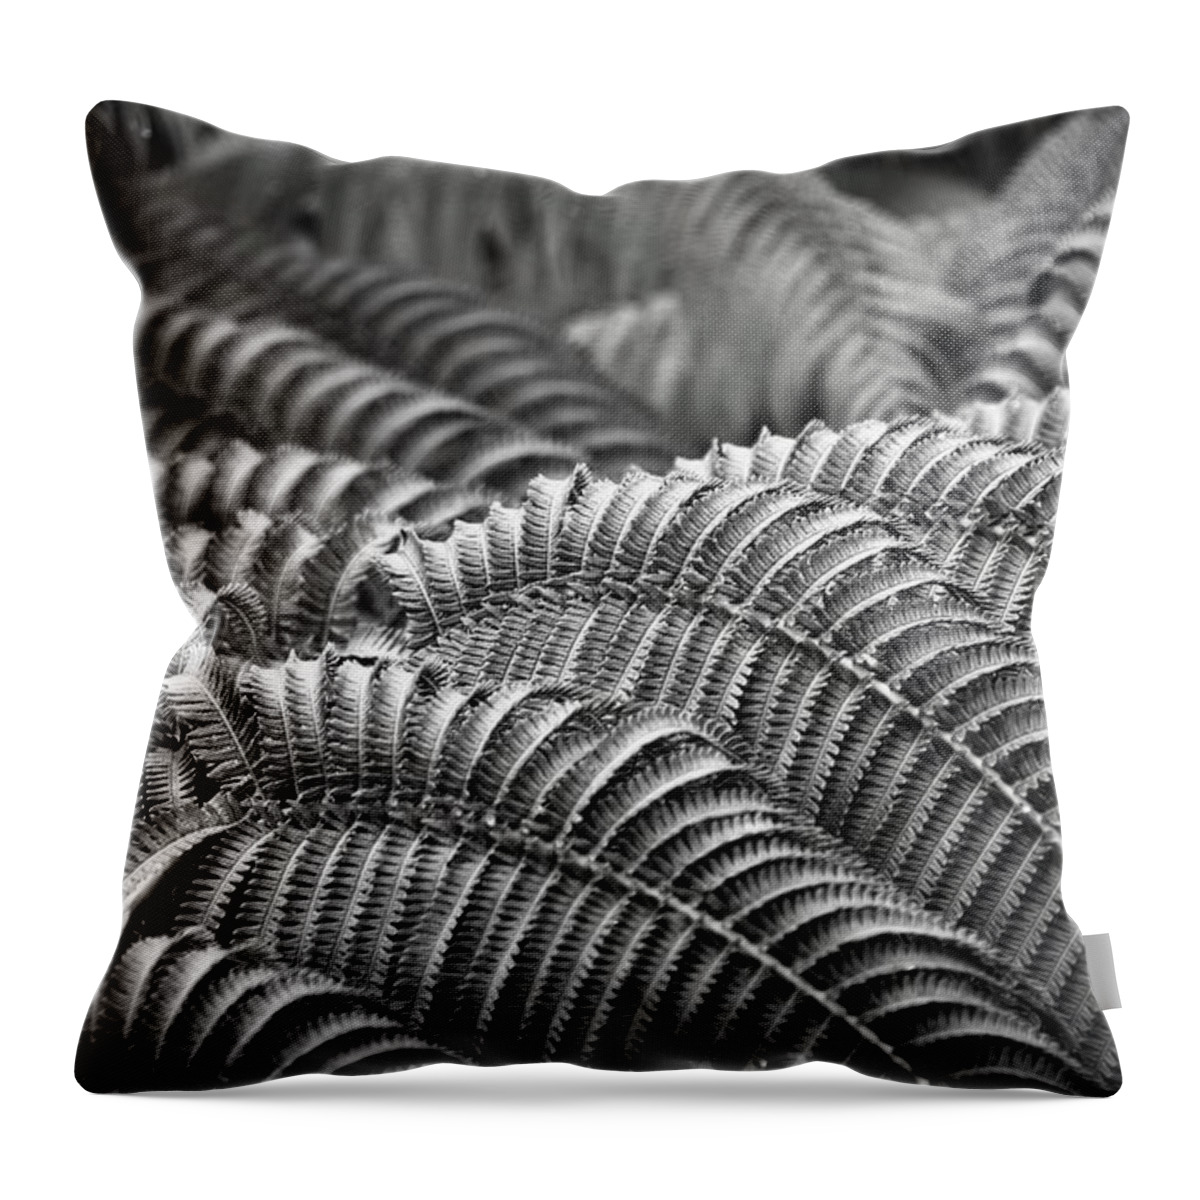 Undulation Throw Pillow featuring the photograph Undulations by Heidi Fickinger